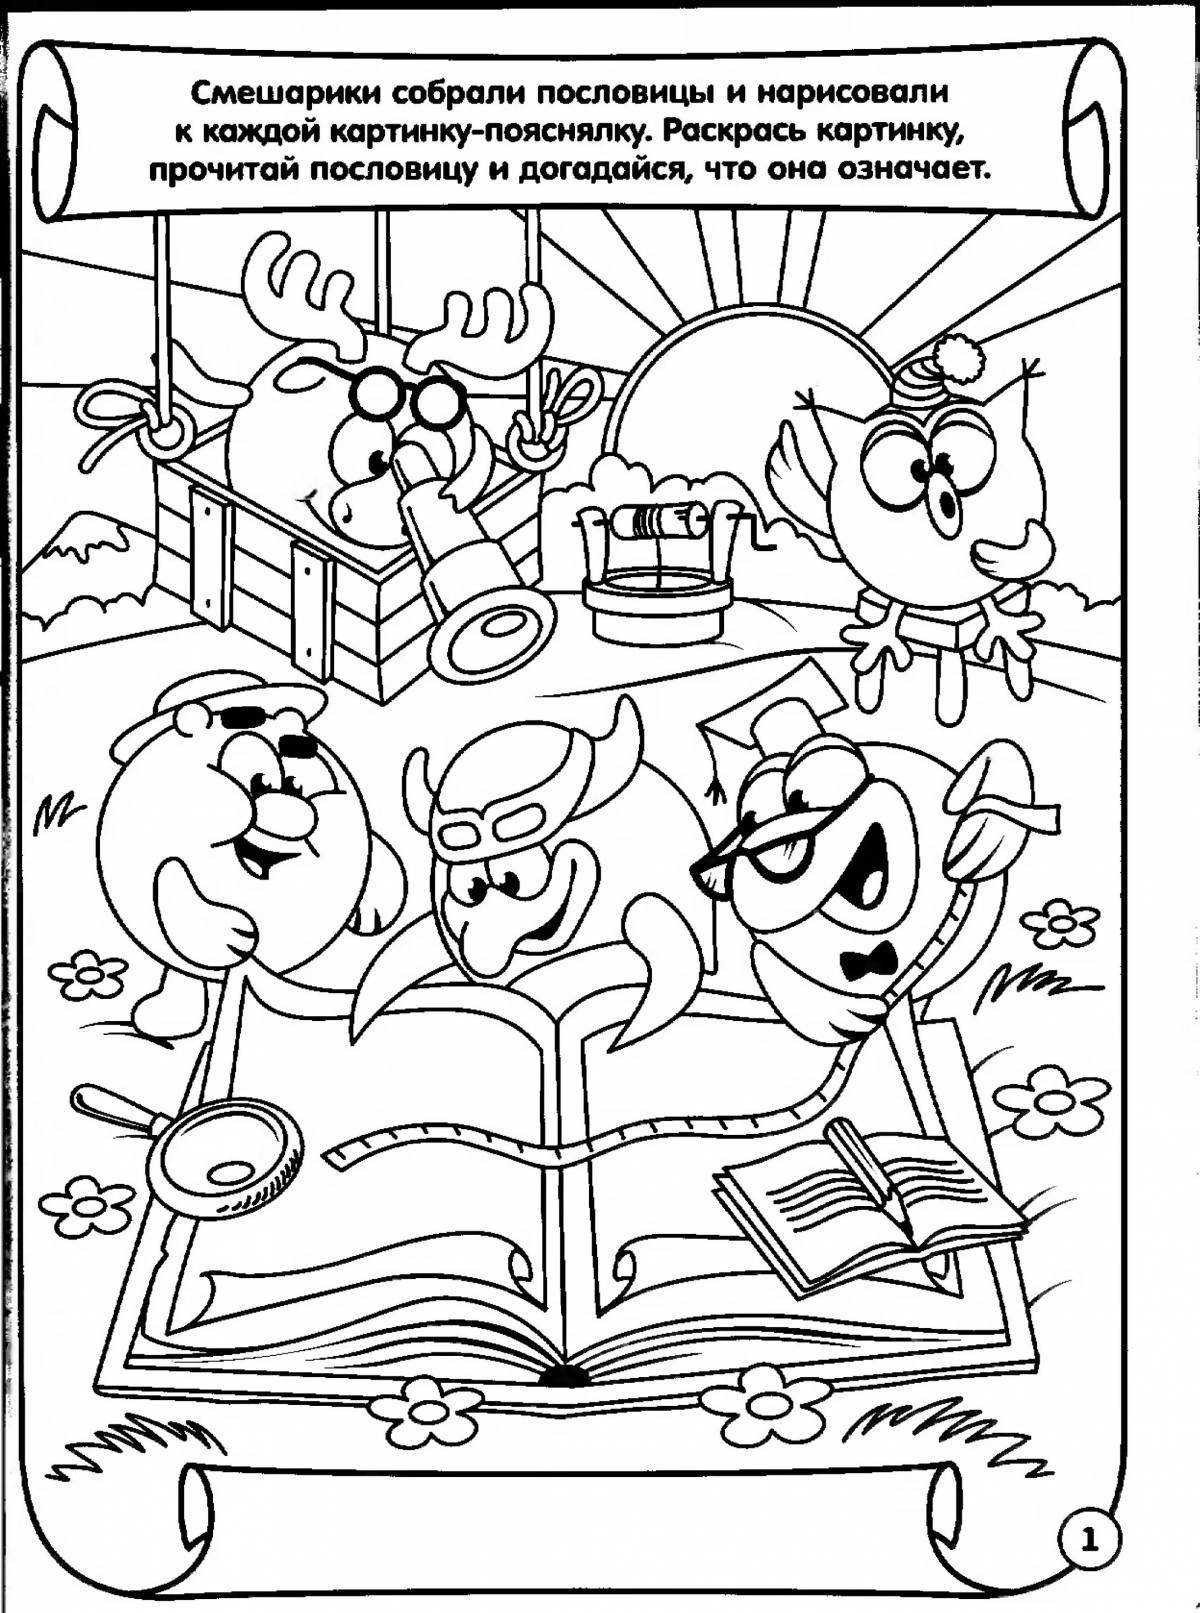 Colorful proverb coloring page